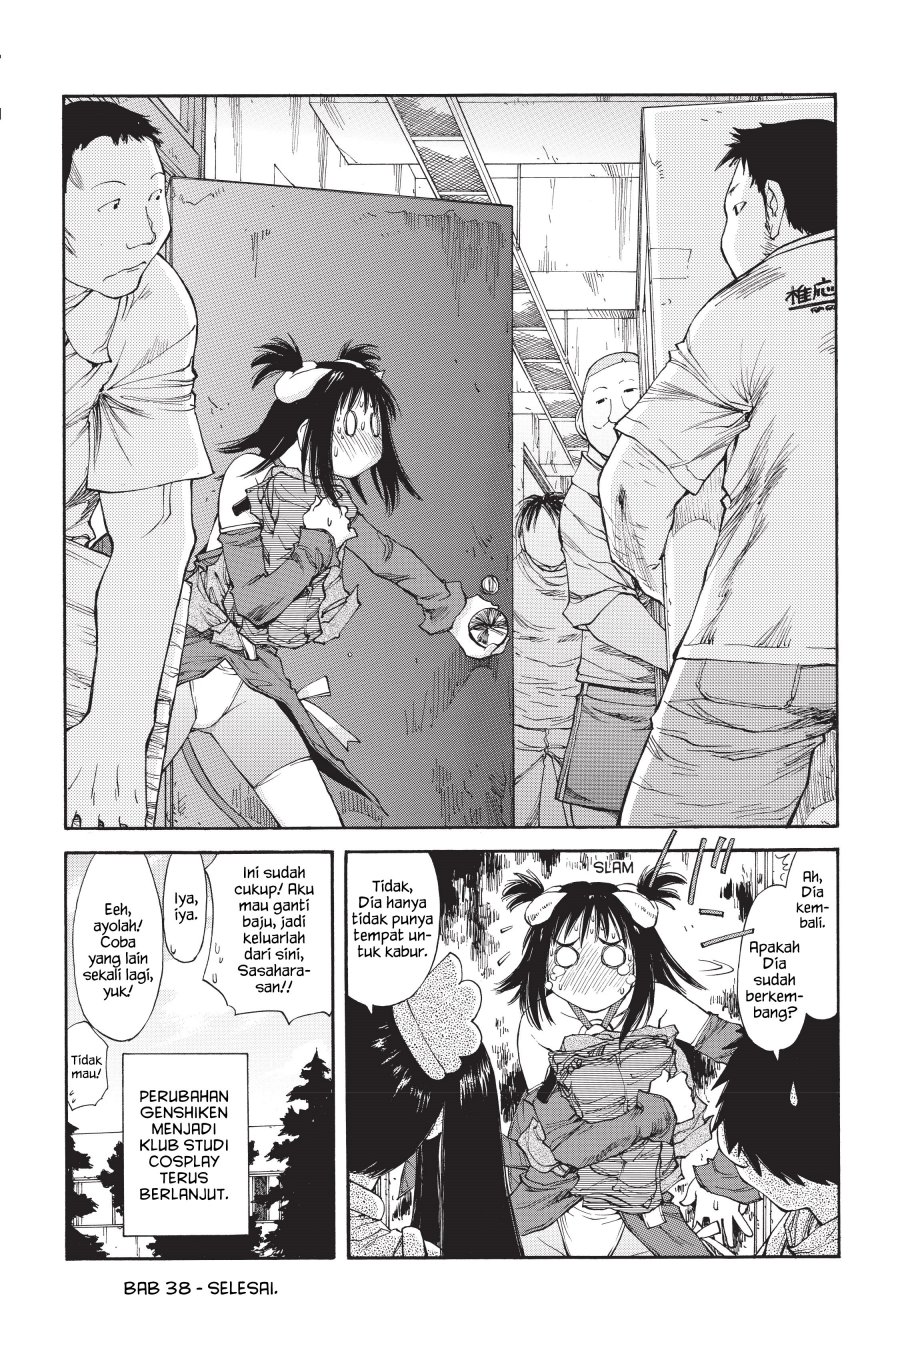 Genshiken – The Society for the Study of Modern Visual Culture Chapter 38 Image 23